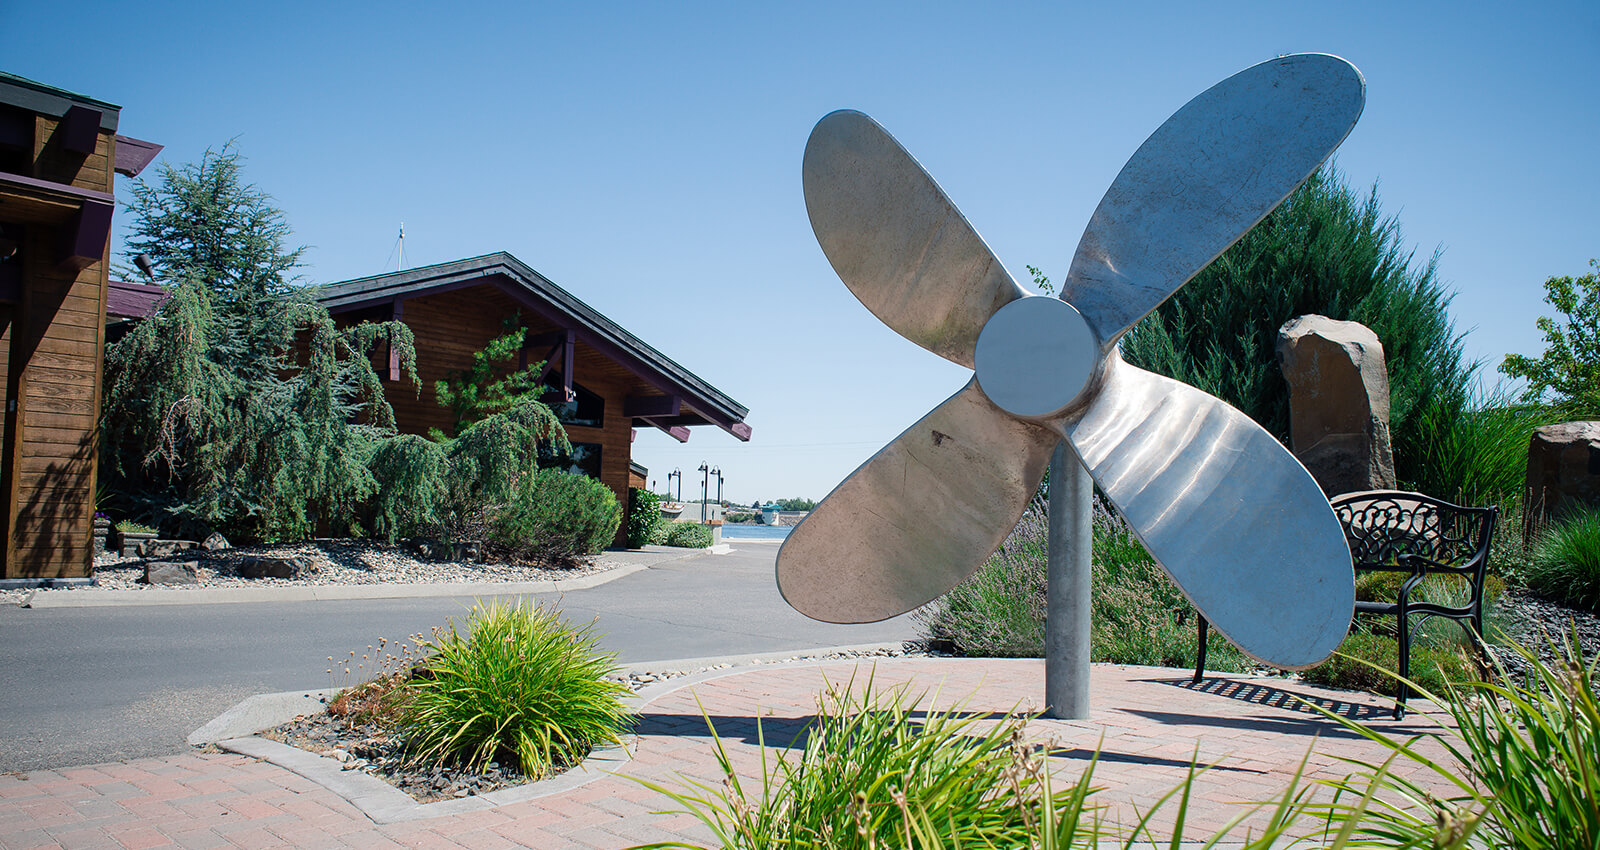 Sun relecting off of the Propeller art installation.